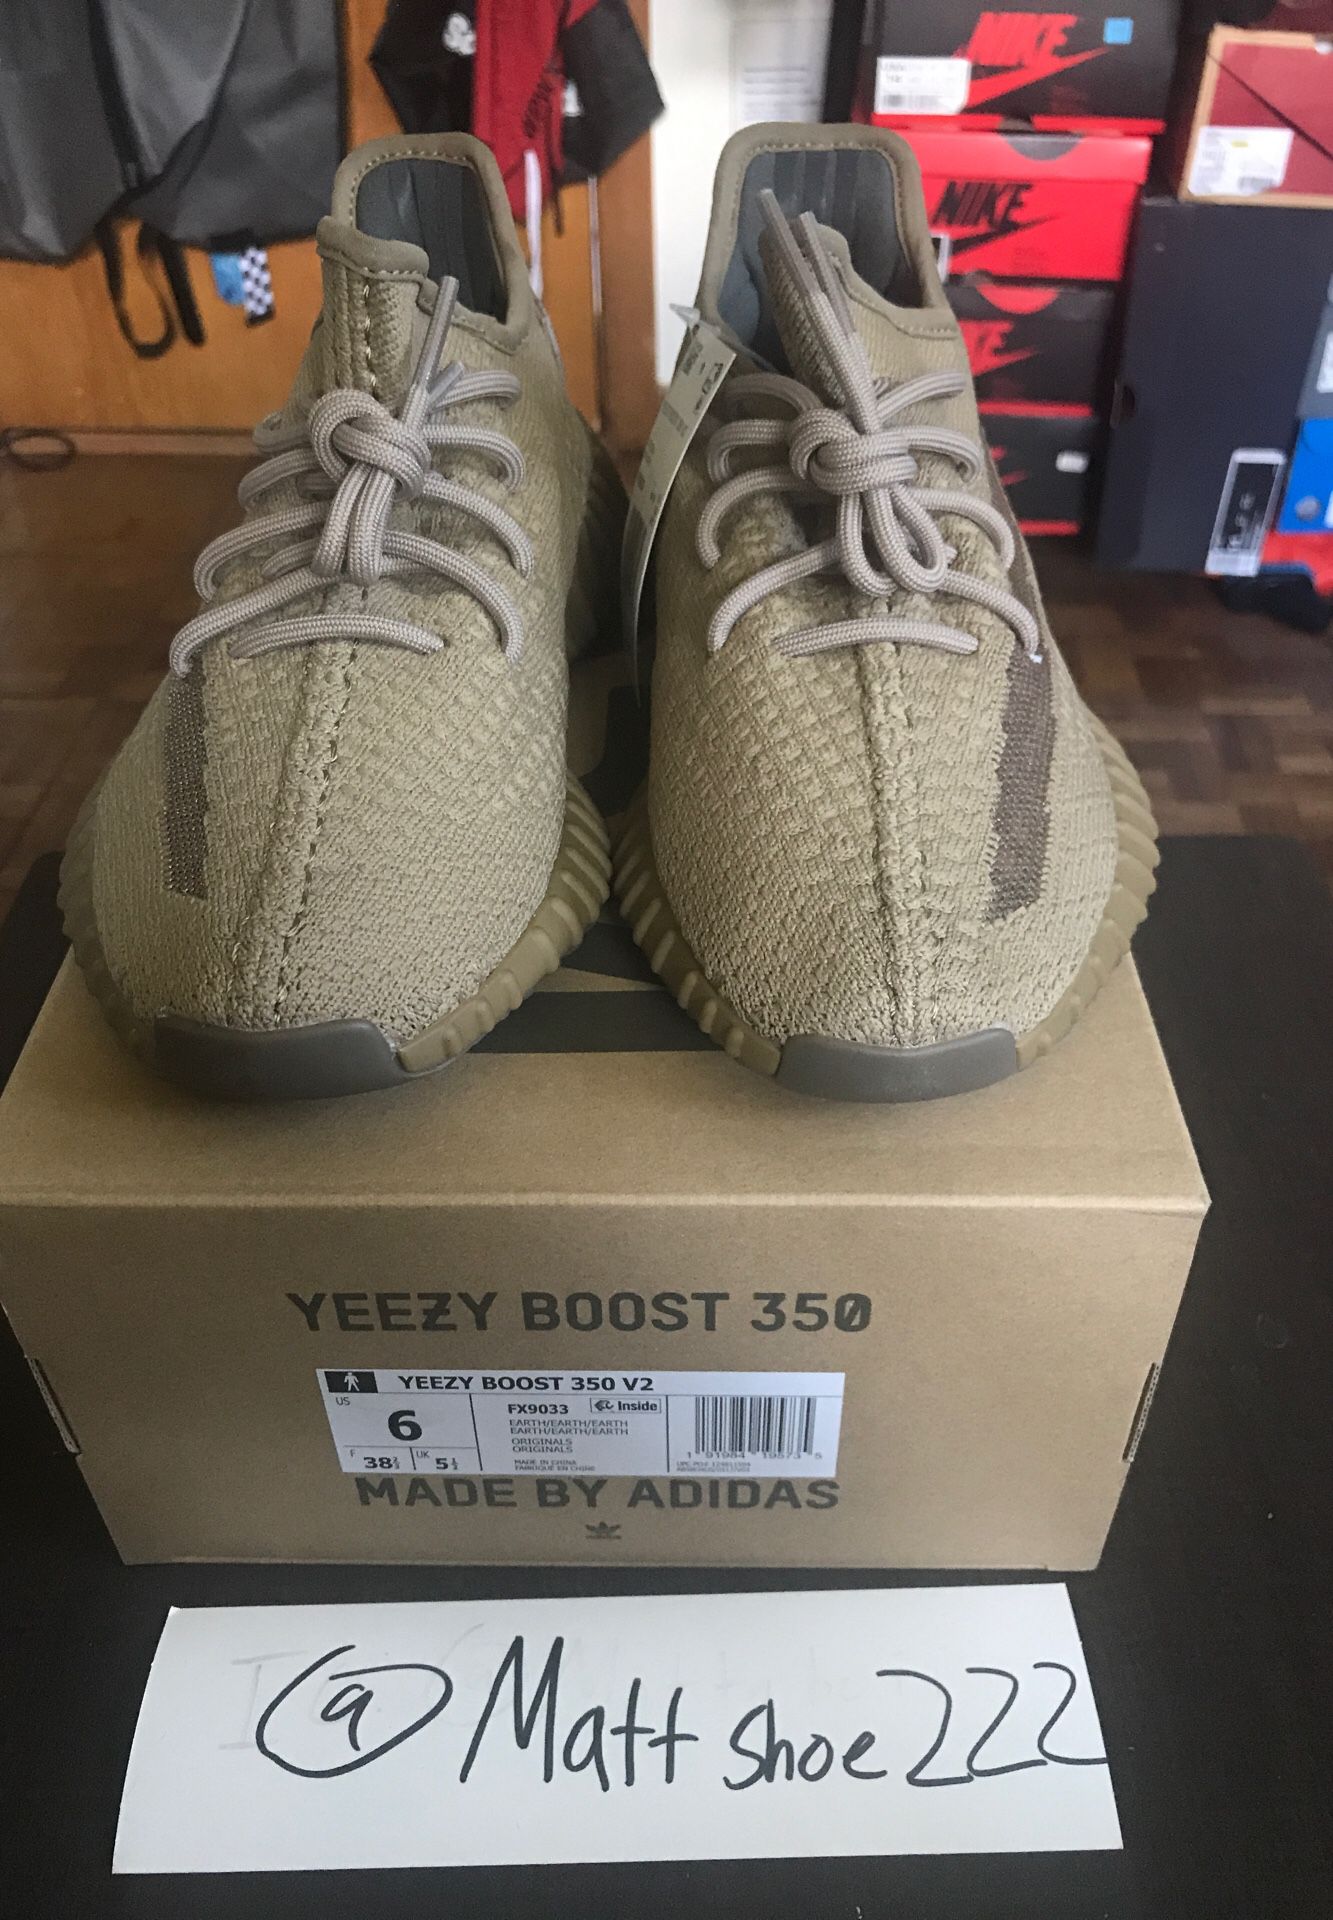 Size 6 Yeezy Boost 350 “Earth” Brand New